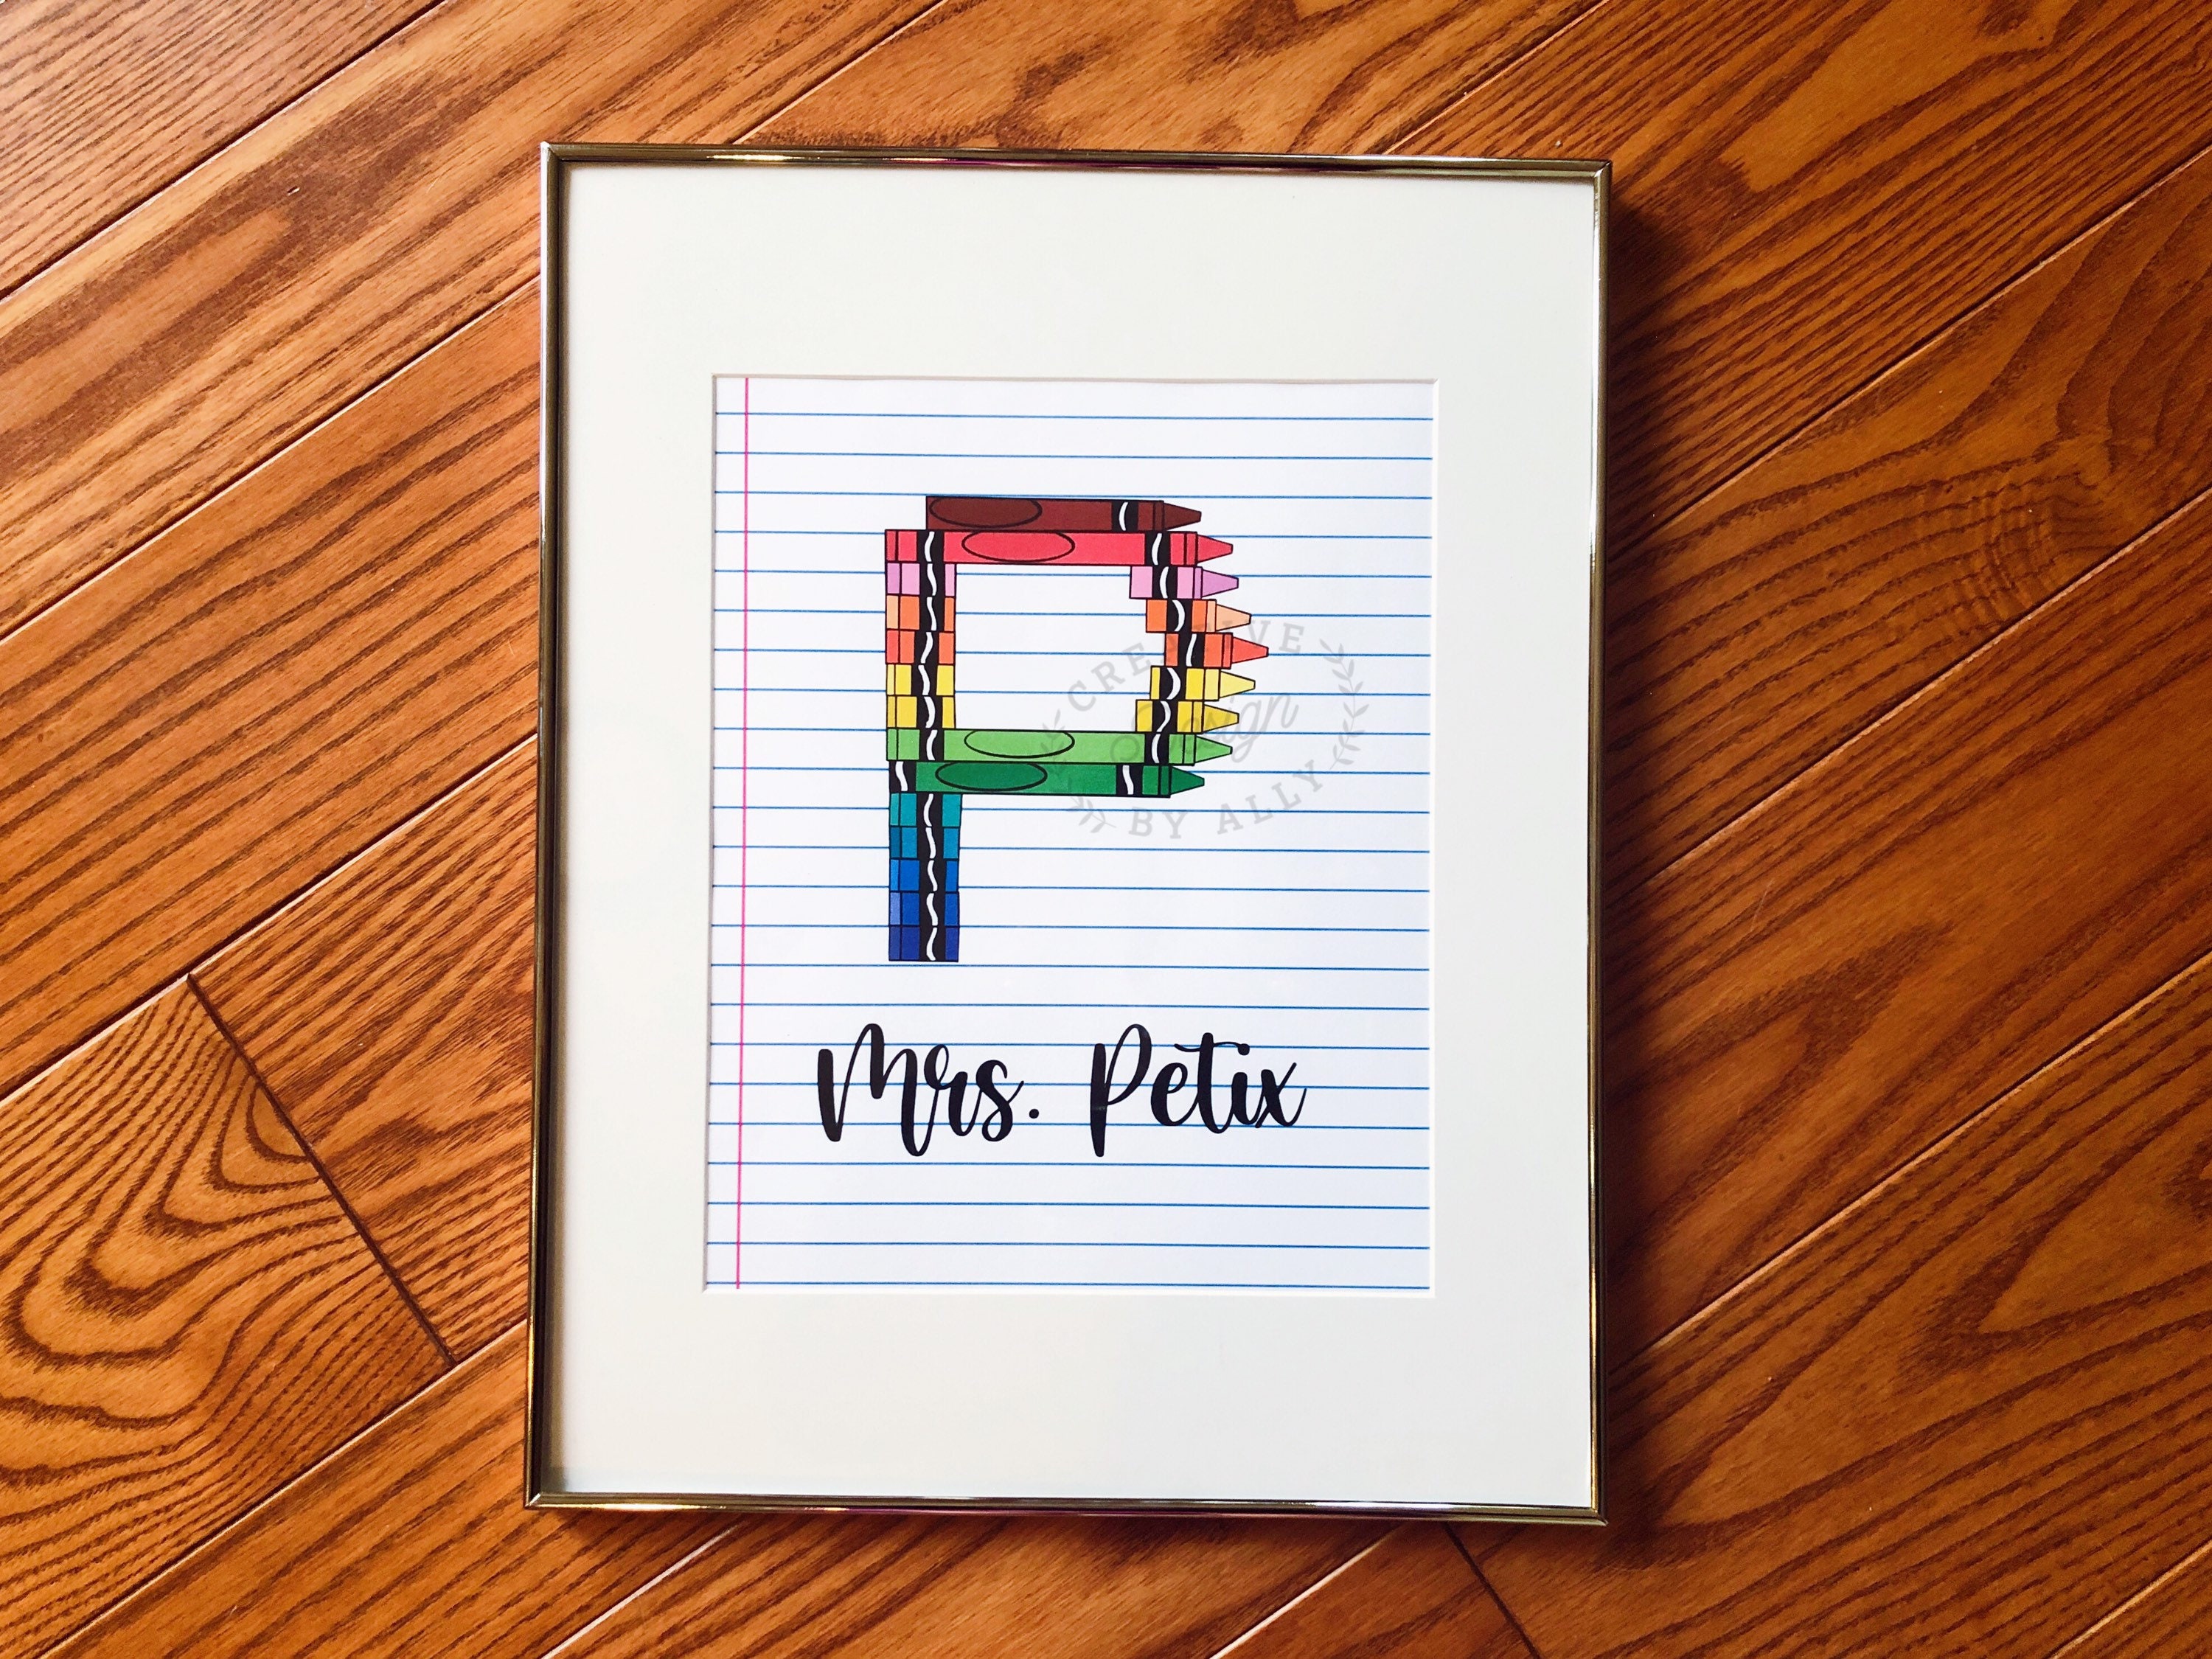 Painted Free Standing Letters for Shelf, Custom Wood 3d Block Letters,  Decorative Initials Desk Decor, Large Wooden Stand Alone Letter P 